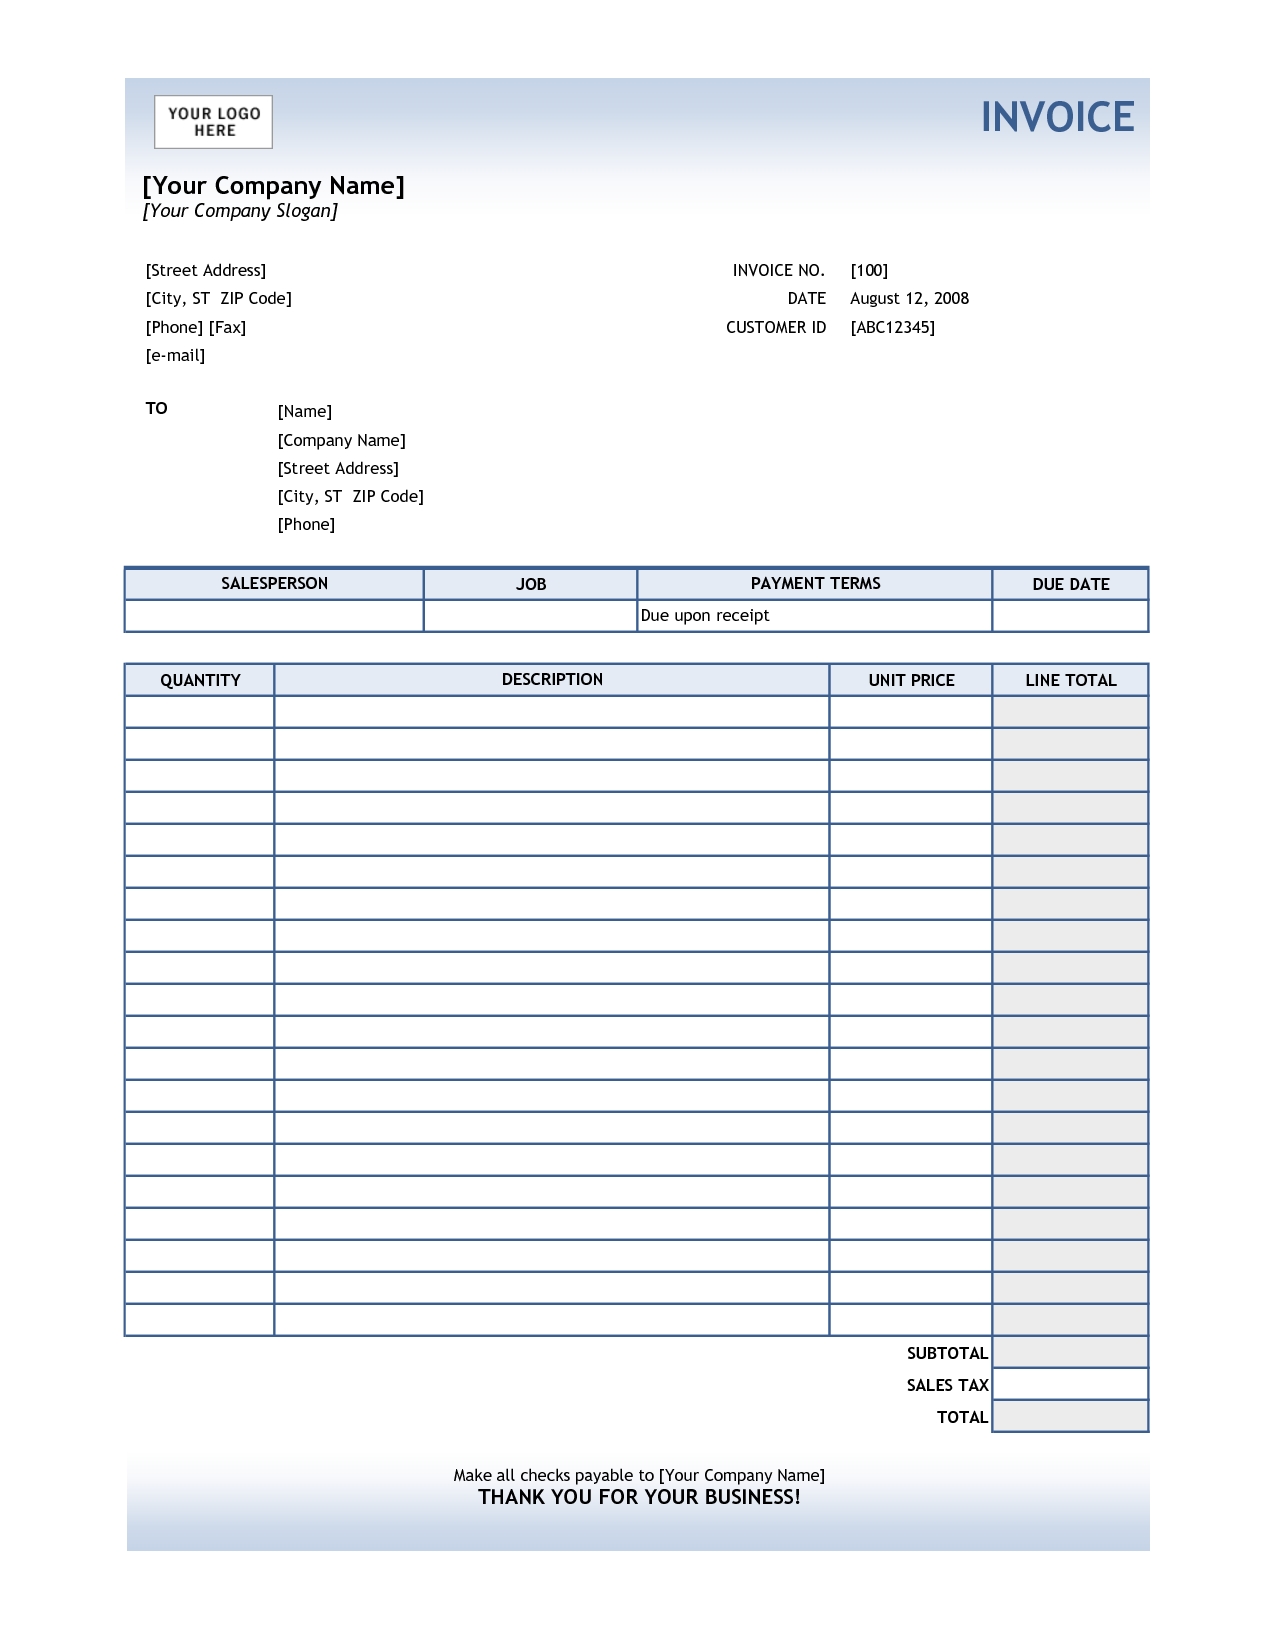 services rendered invoice template counseldynu sample invoice for services